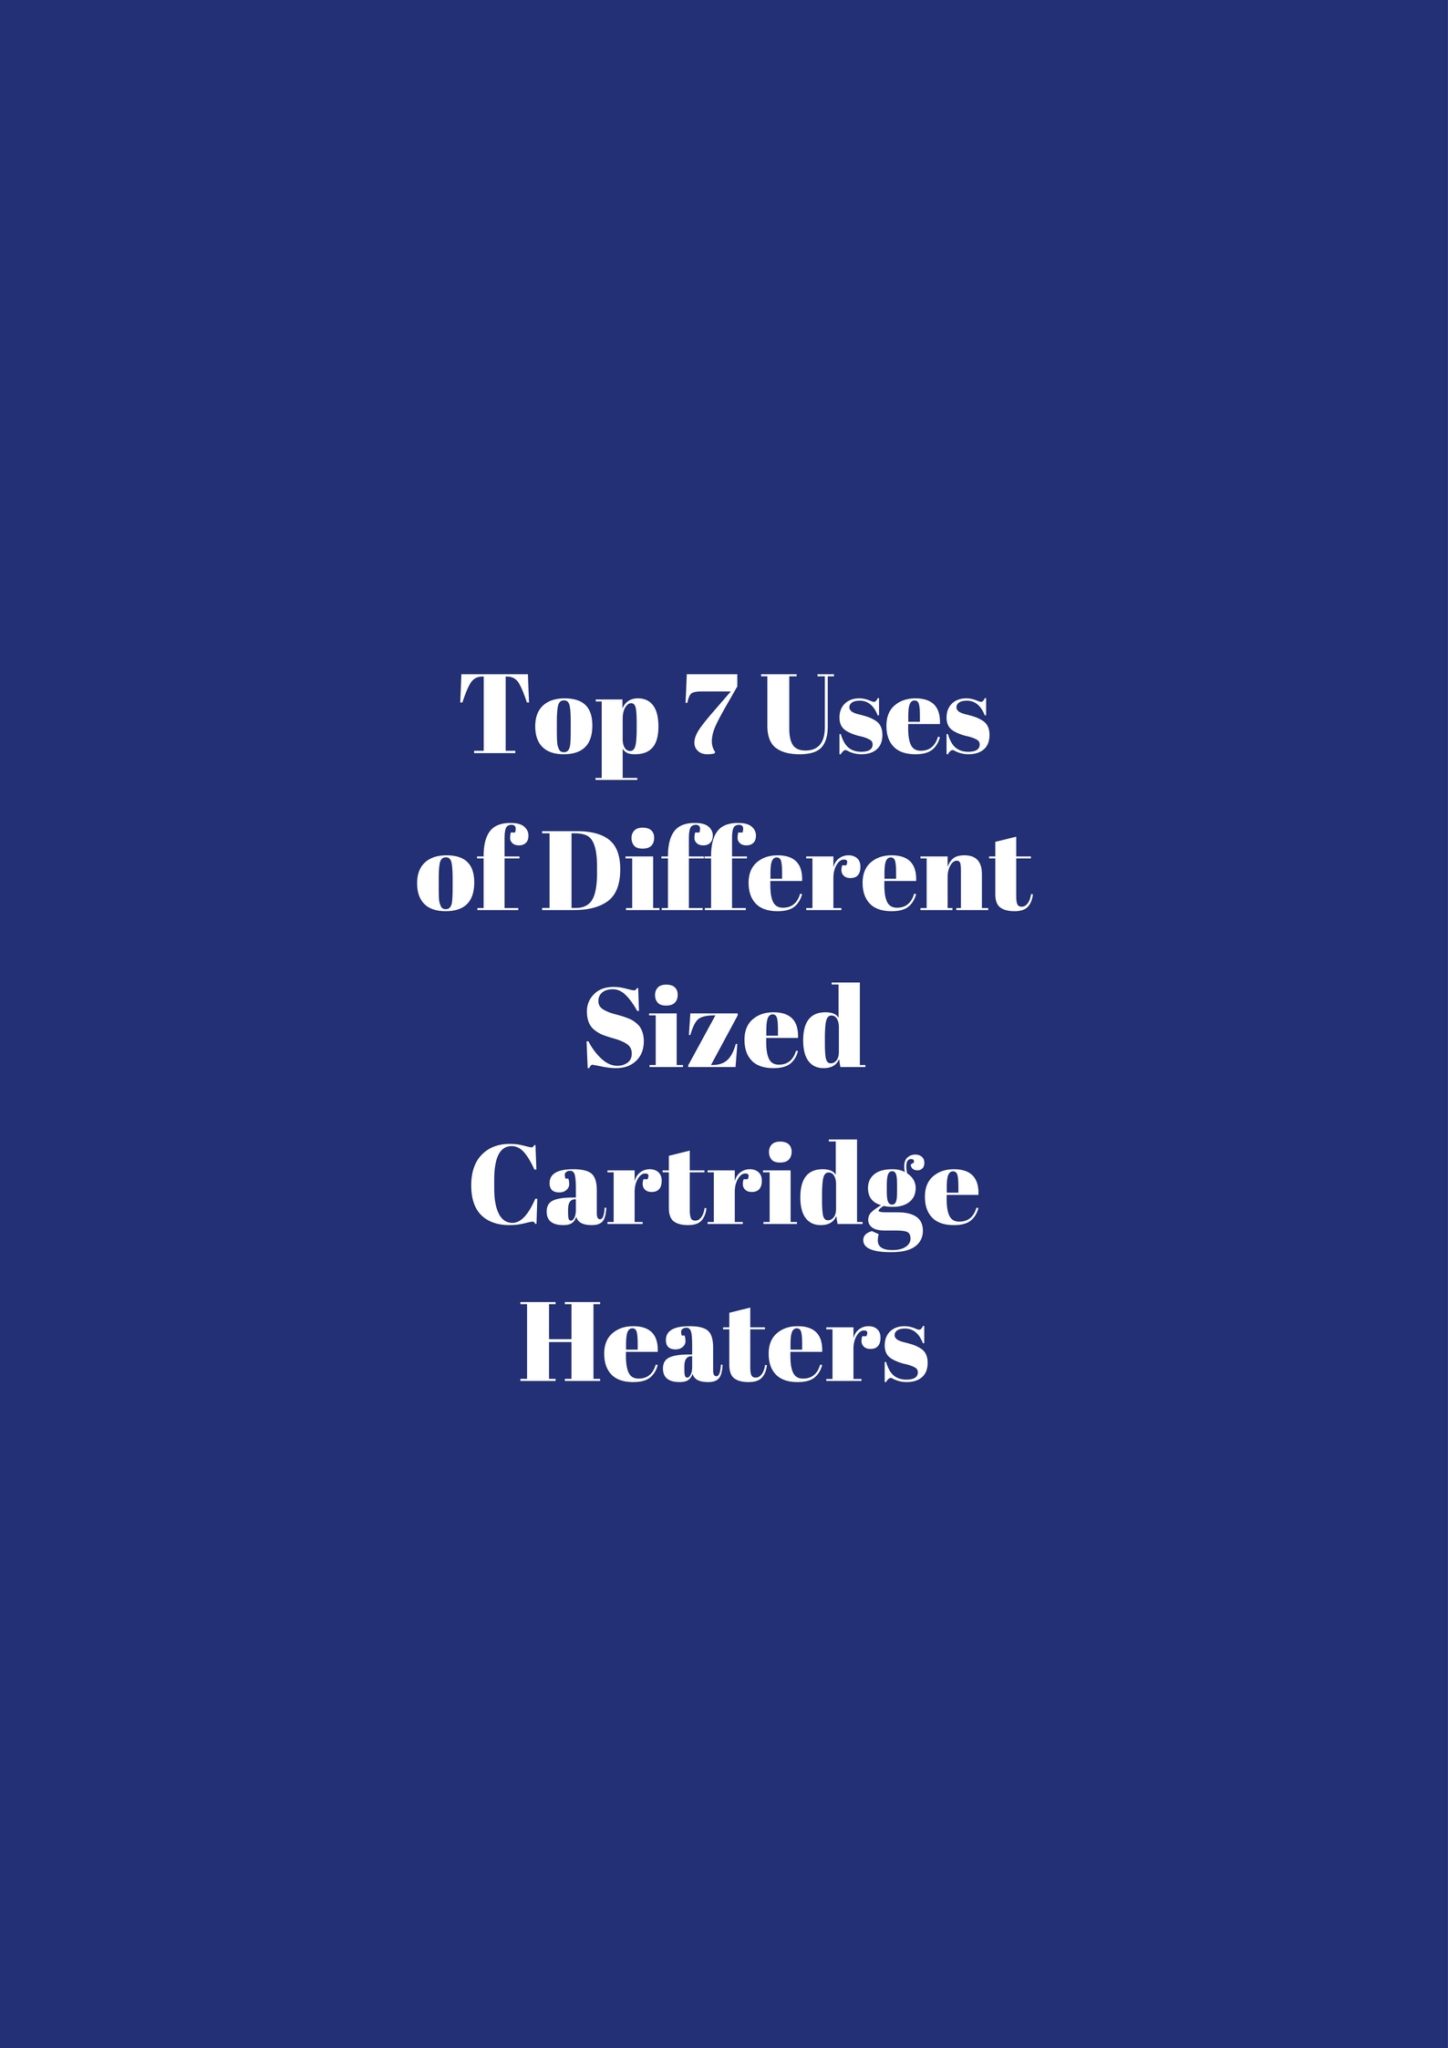 Top 7 uses for different sized cartidge heaters